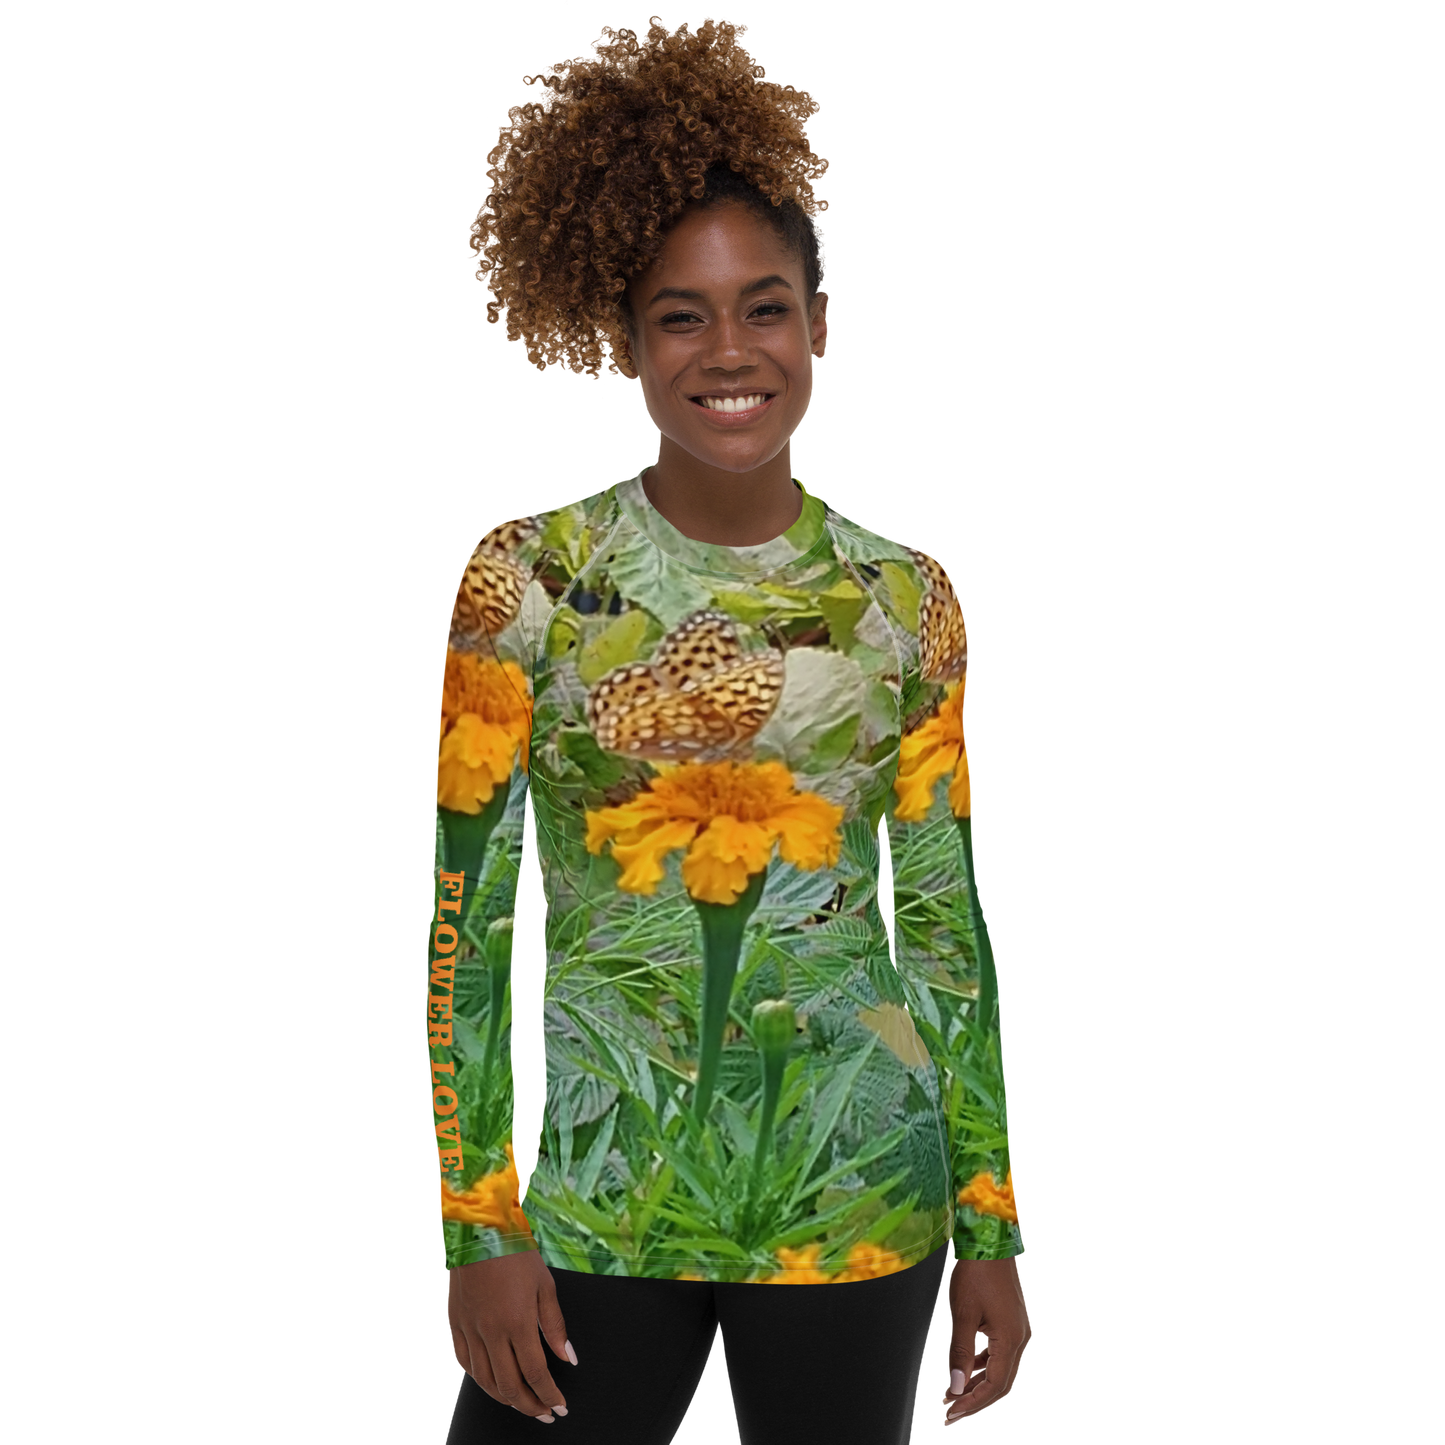 The FLOWER LOVE Collection - "Butterfly on a Bloom" Design Luxurious Women's Rash Guard, Sun Protective Clothing, Sports & Fitness Clothing